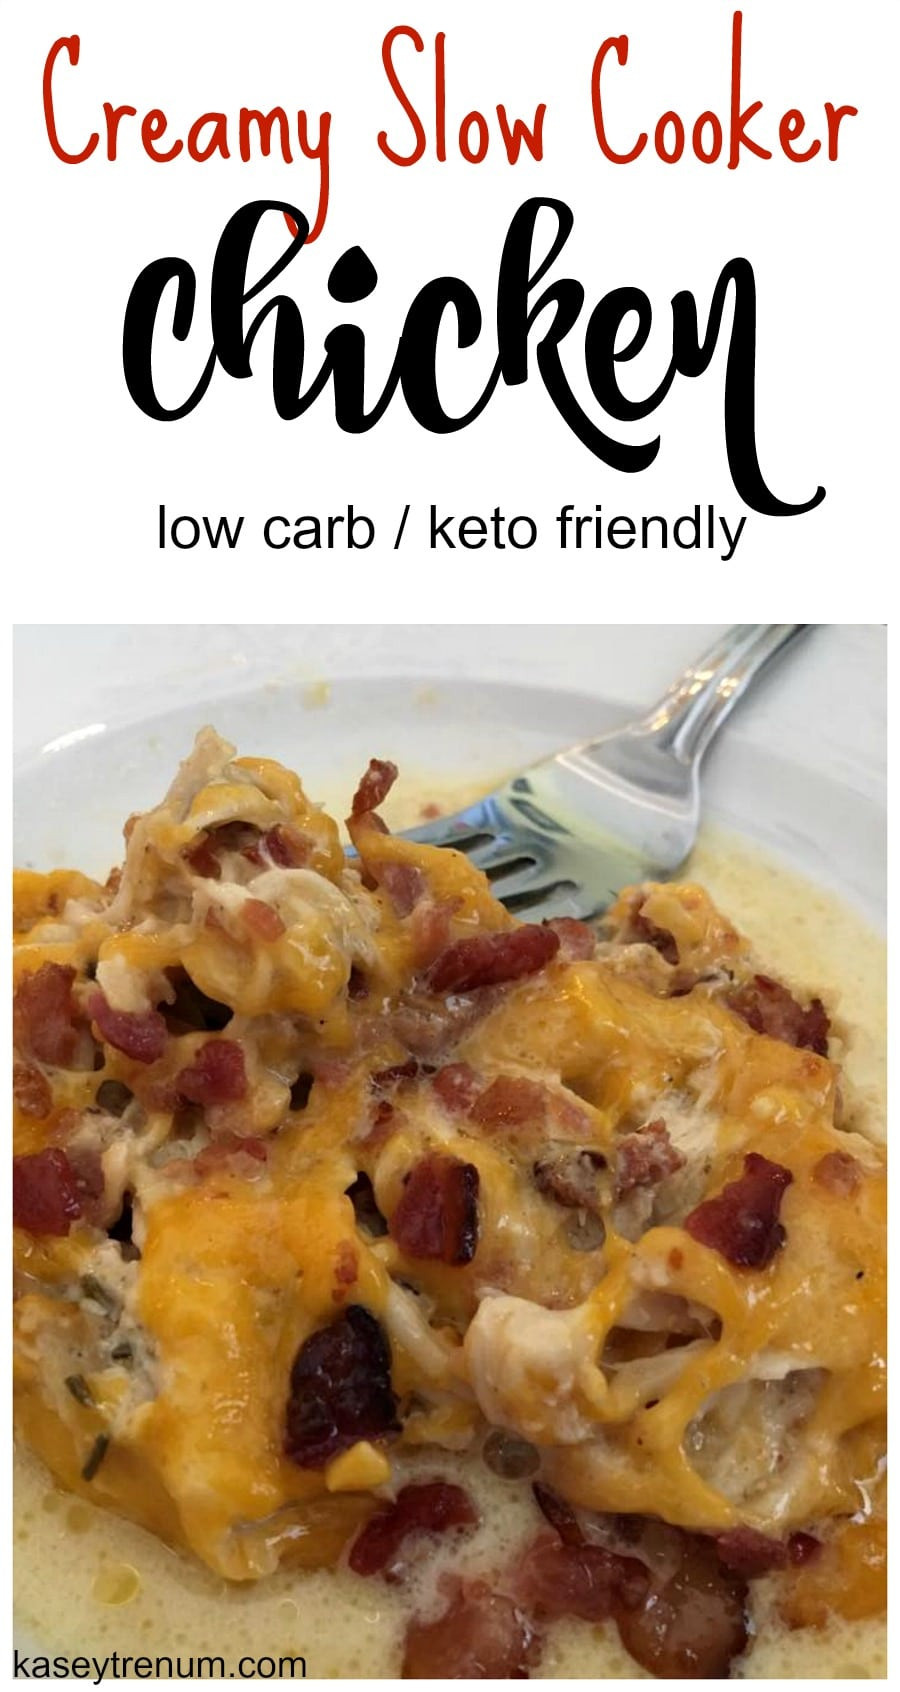 Slow Cooker Keto Chicken Recipes
 Creamy Slow Cooker Chicken with Bacon & Cheese low carb